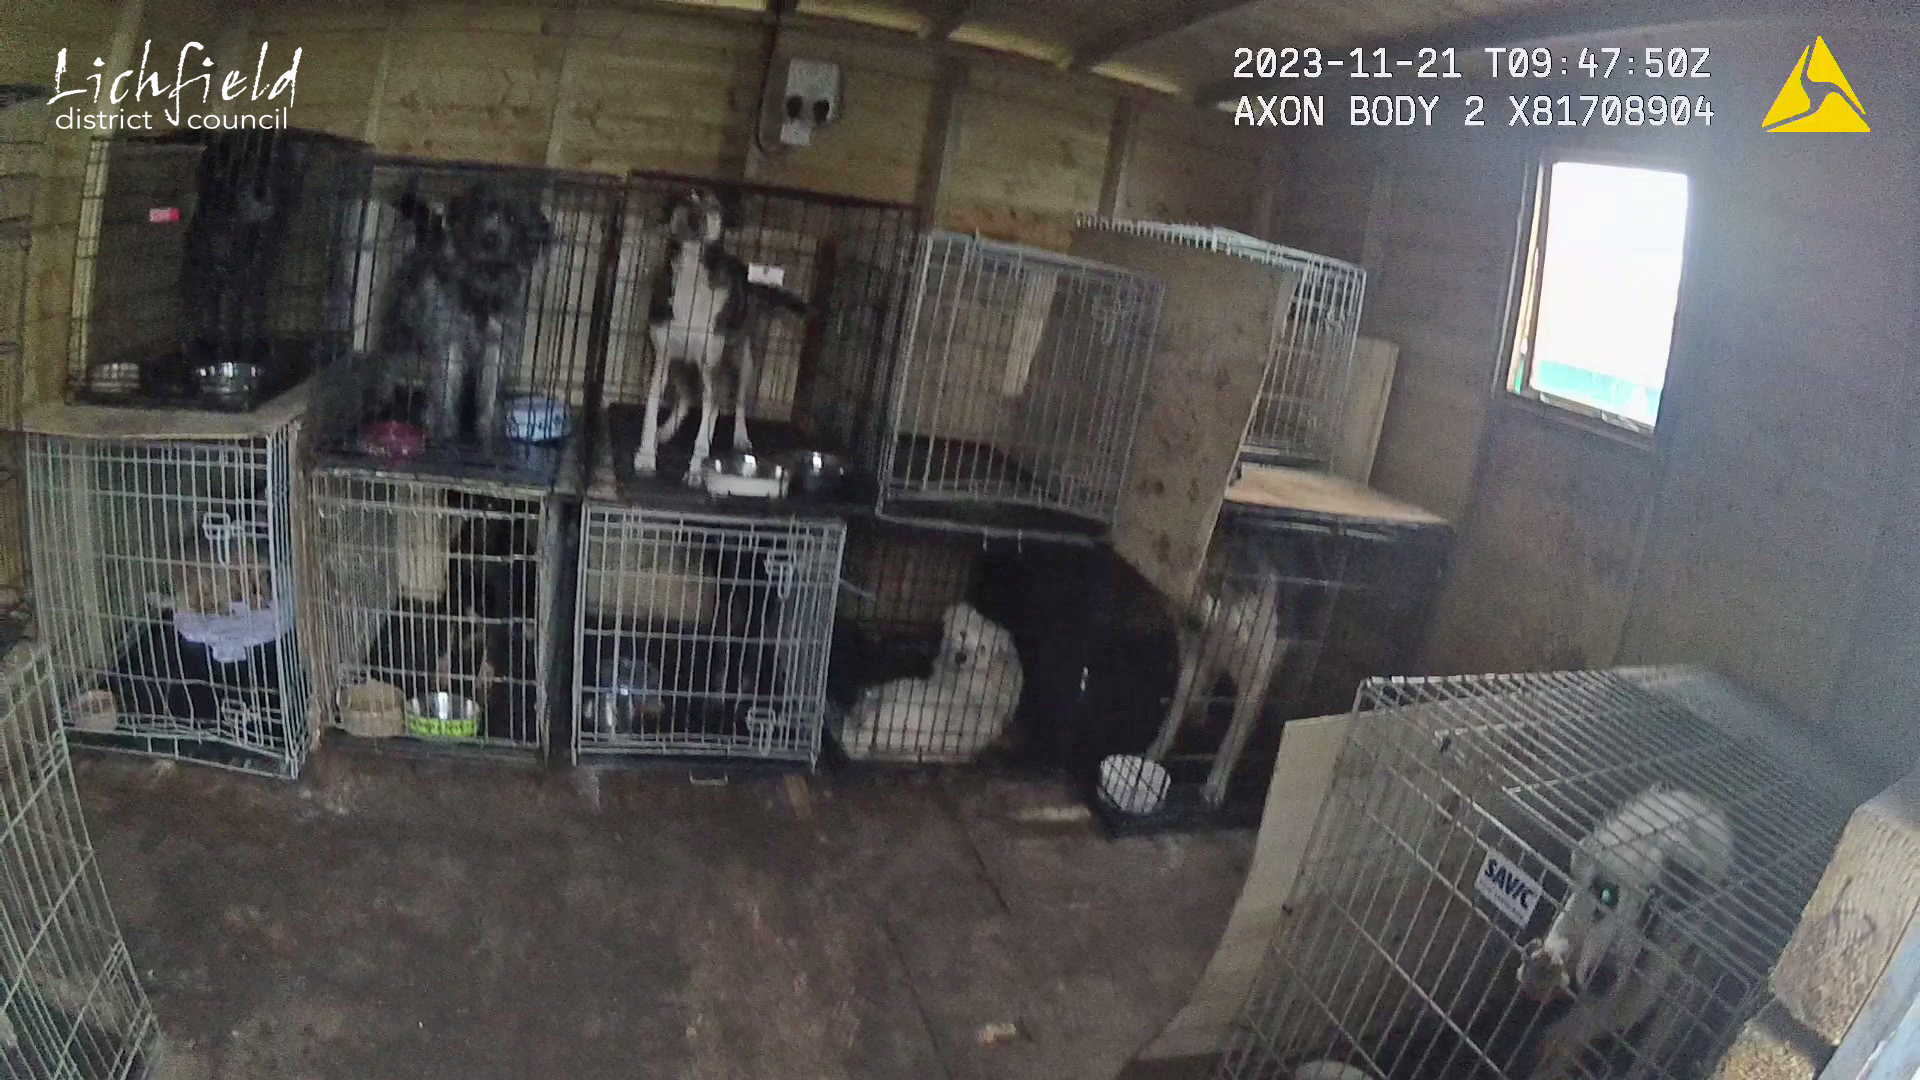 Dogs at one of the properties were captured on an Environmental Health Officer’s body worn video camera.